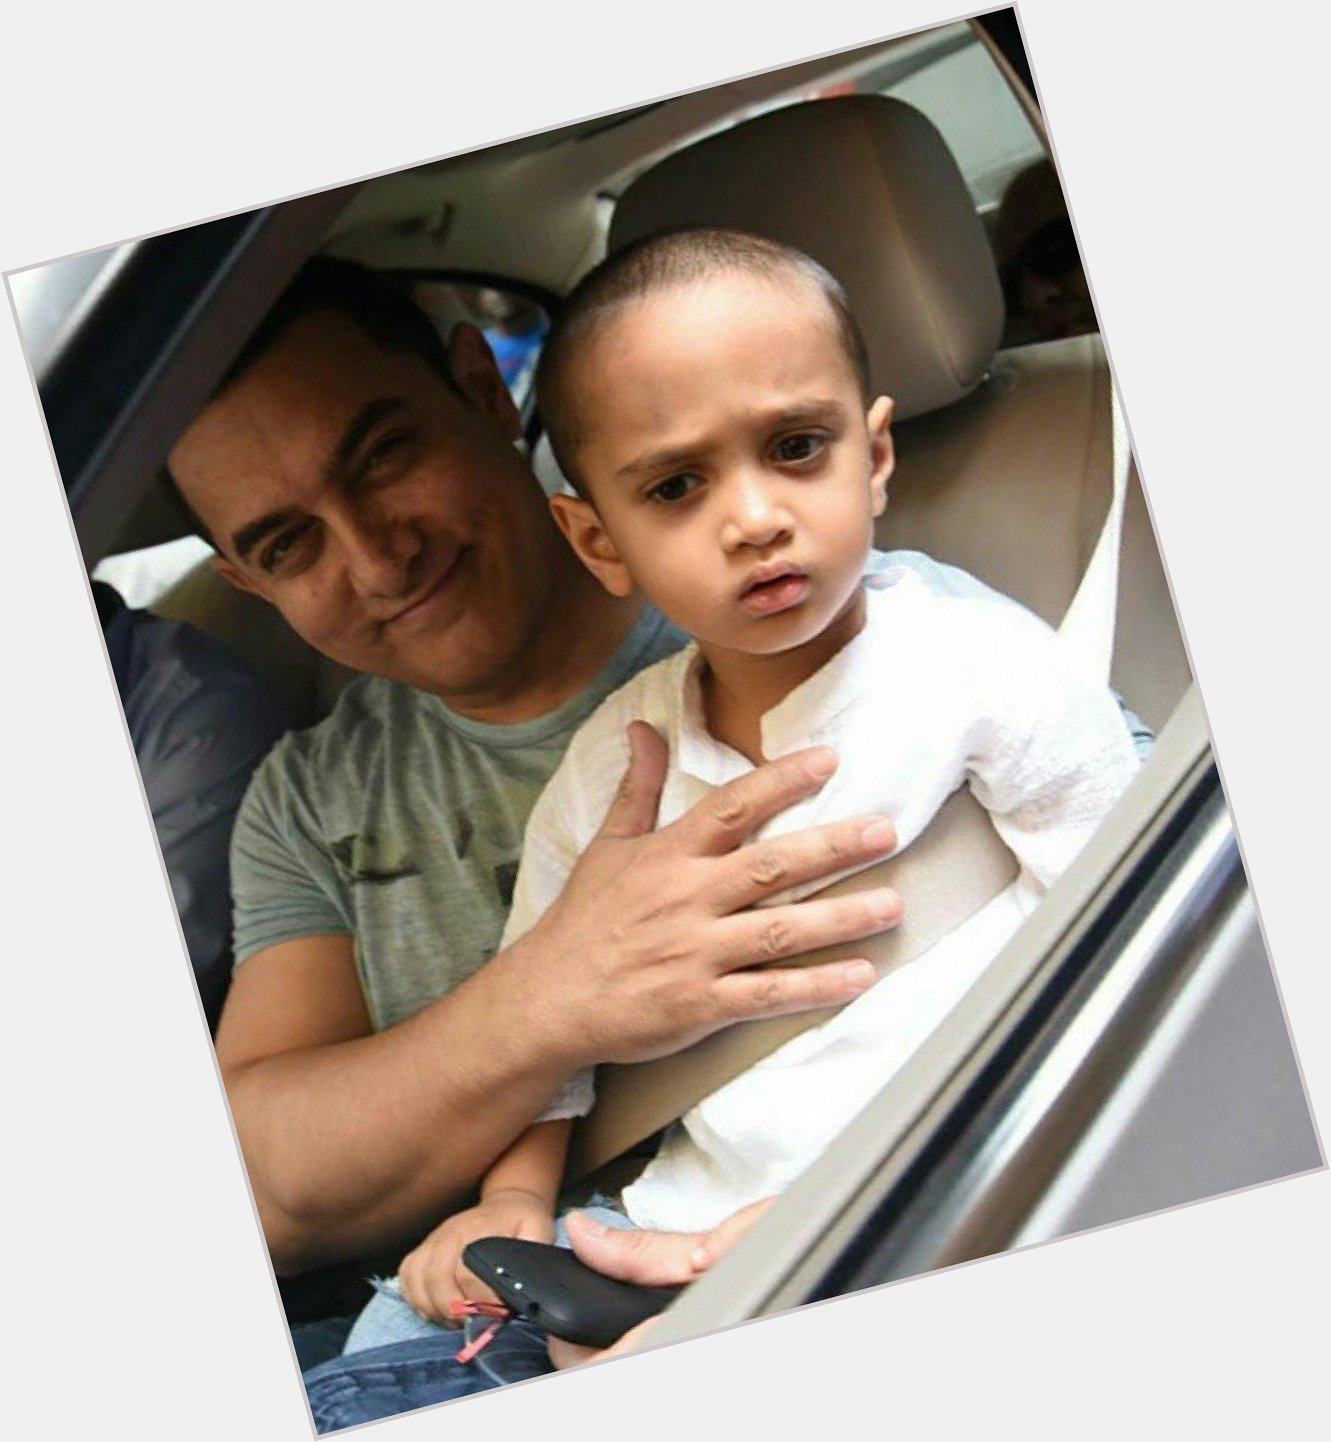 Bollywood @ 12 megapixels- with his youngest son Azad. 
Happy Birthday Aamir Khan 